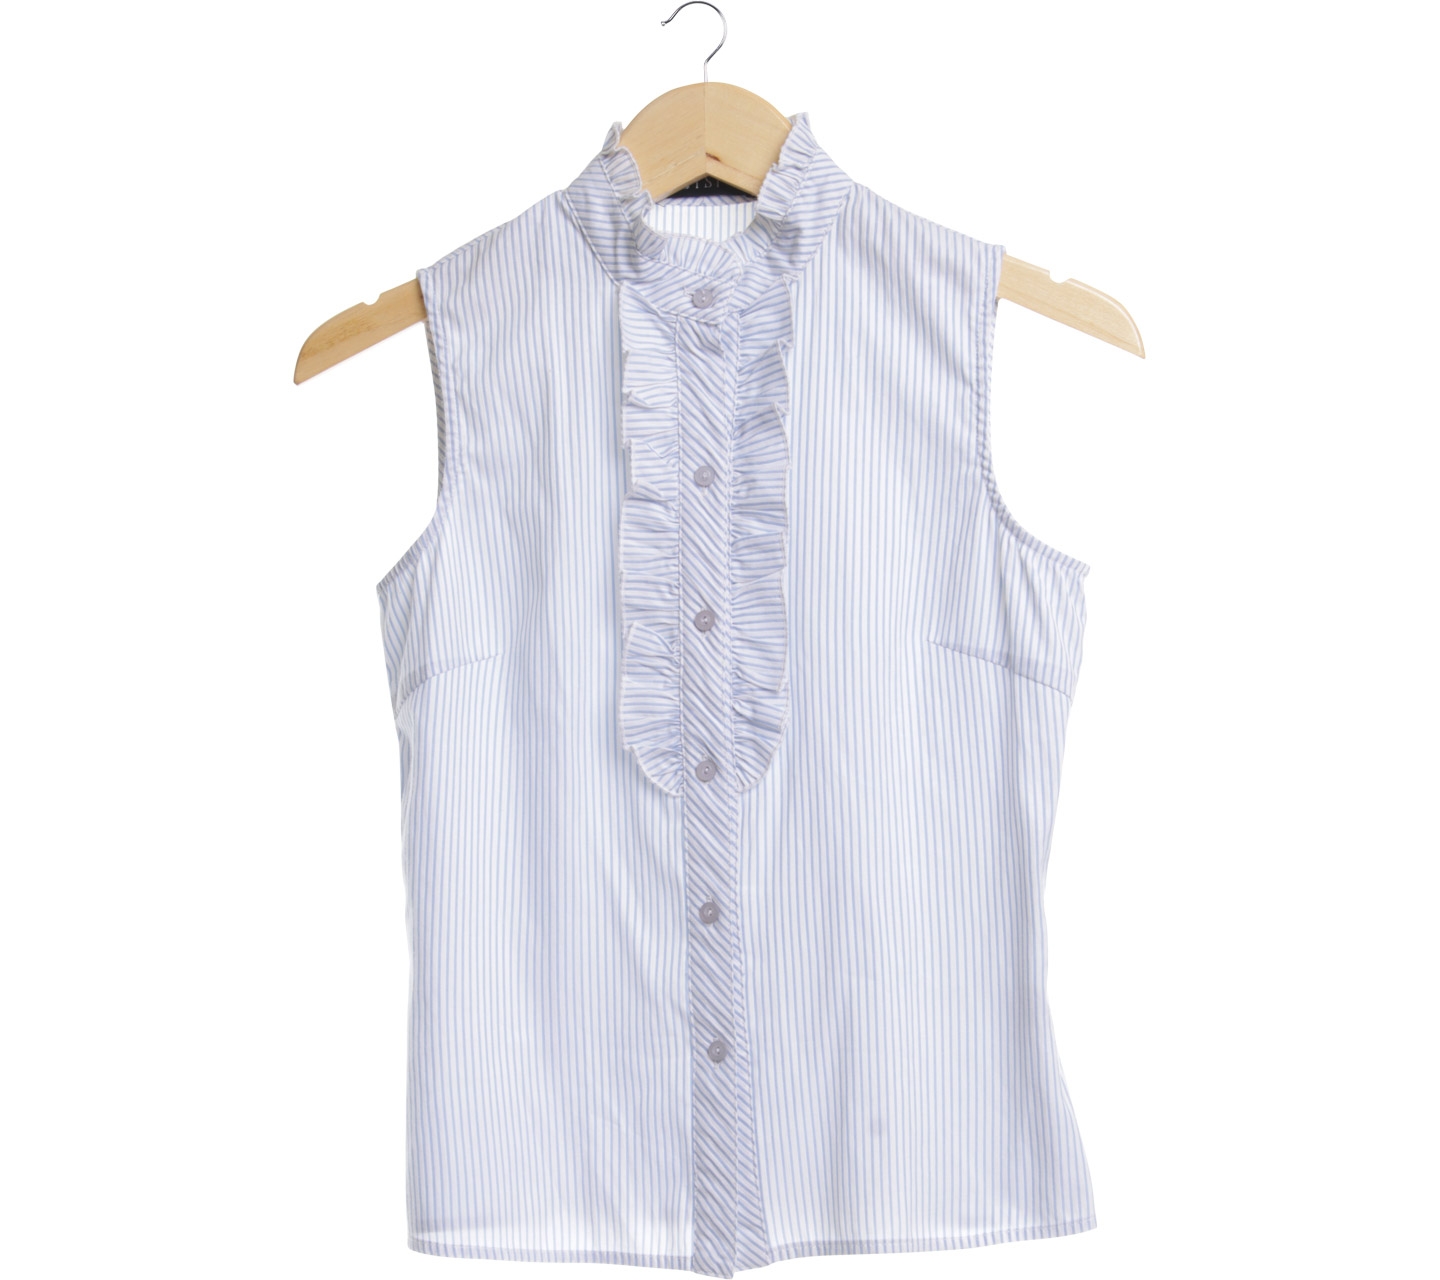 BYSI Light Blue And White Striped Sleeveless